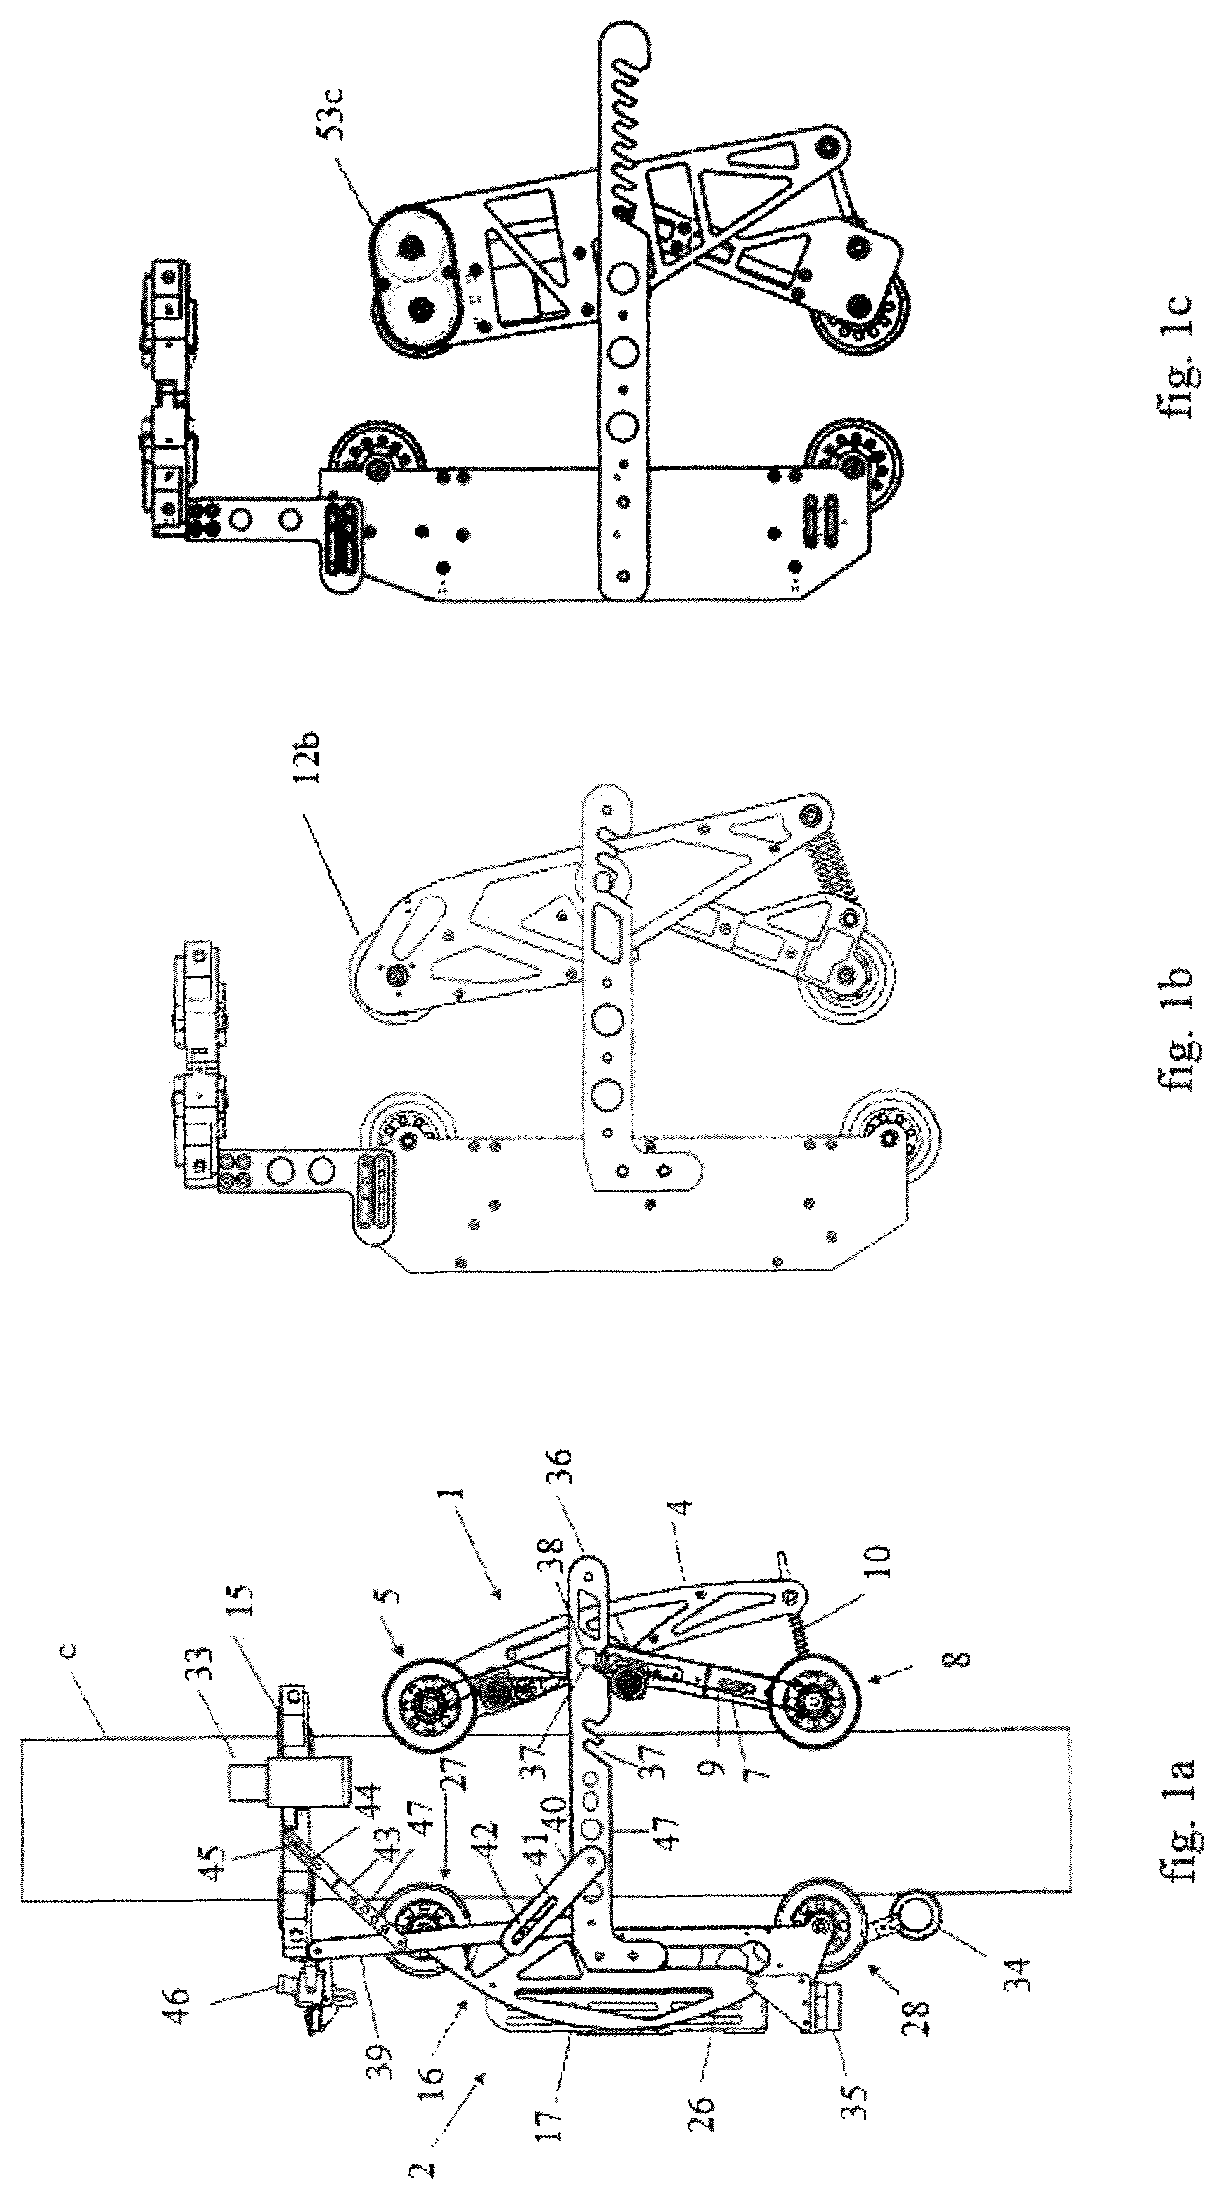 Movable detector and methods for inspecting elongated tube-like objects in equipment